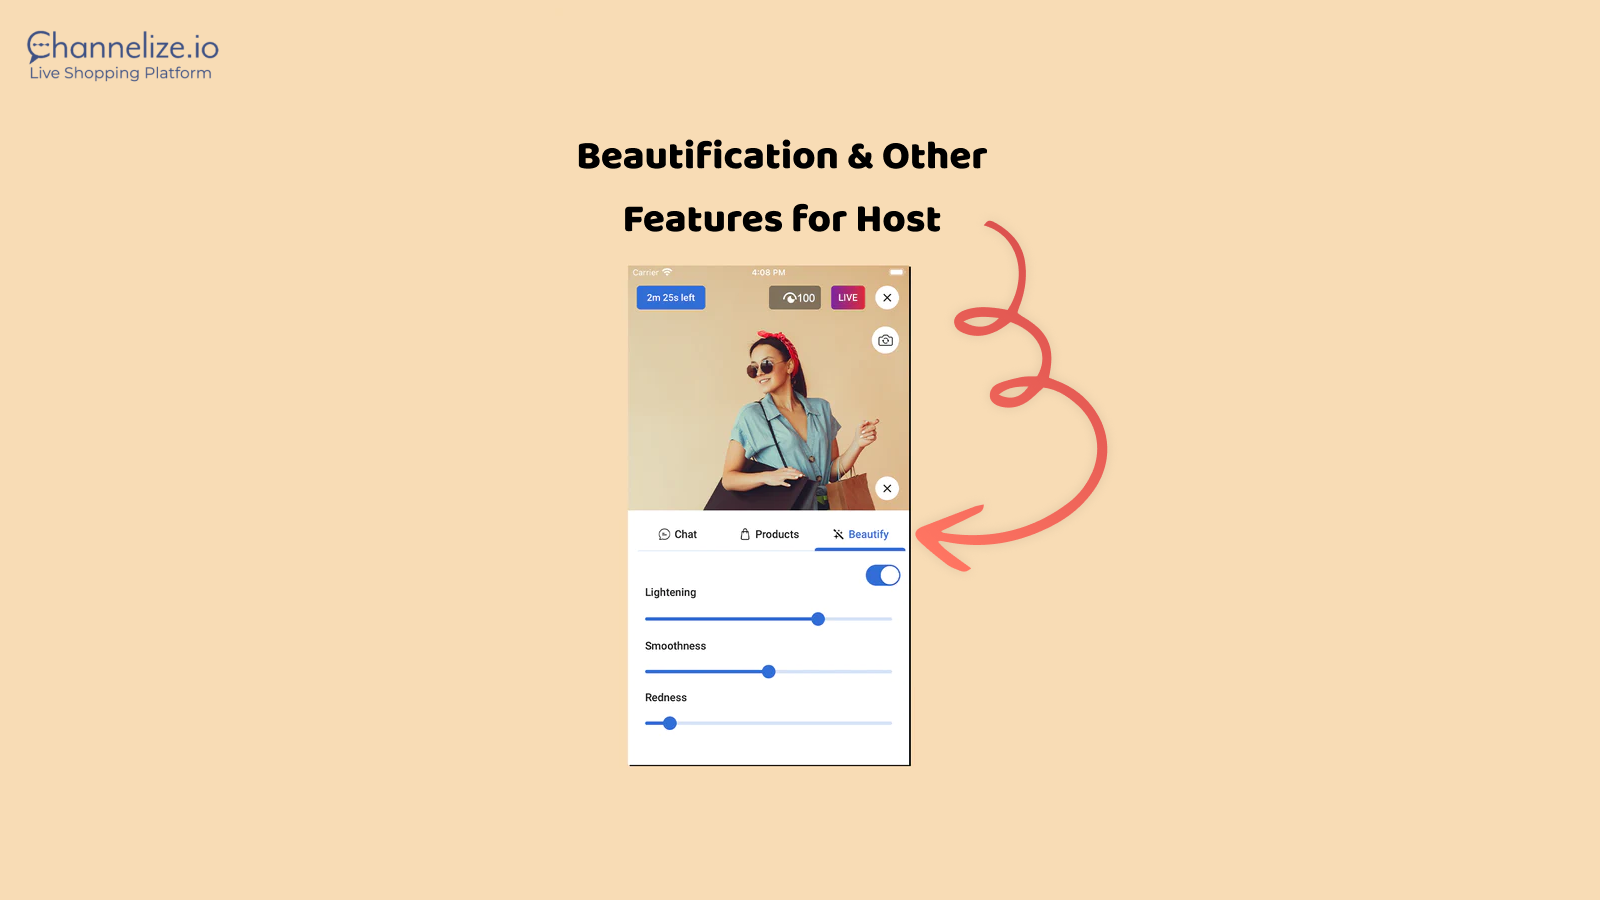 Beautification & Other Features of the Host App